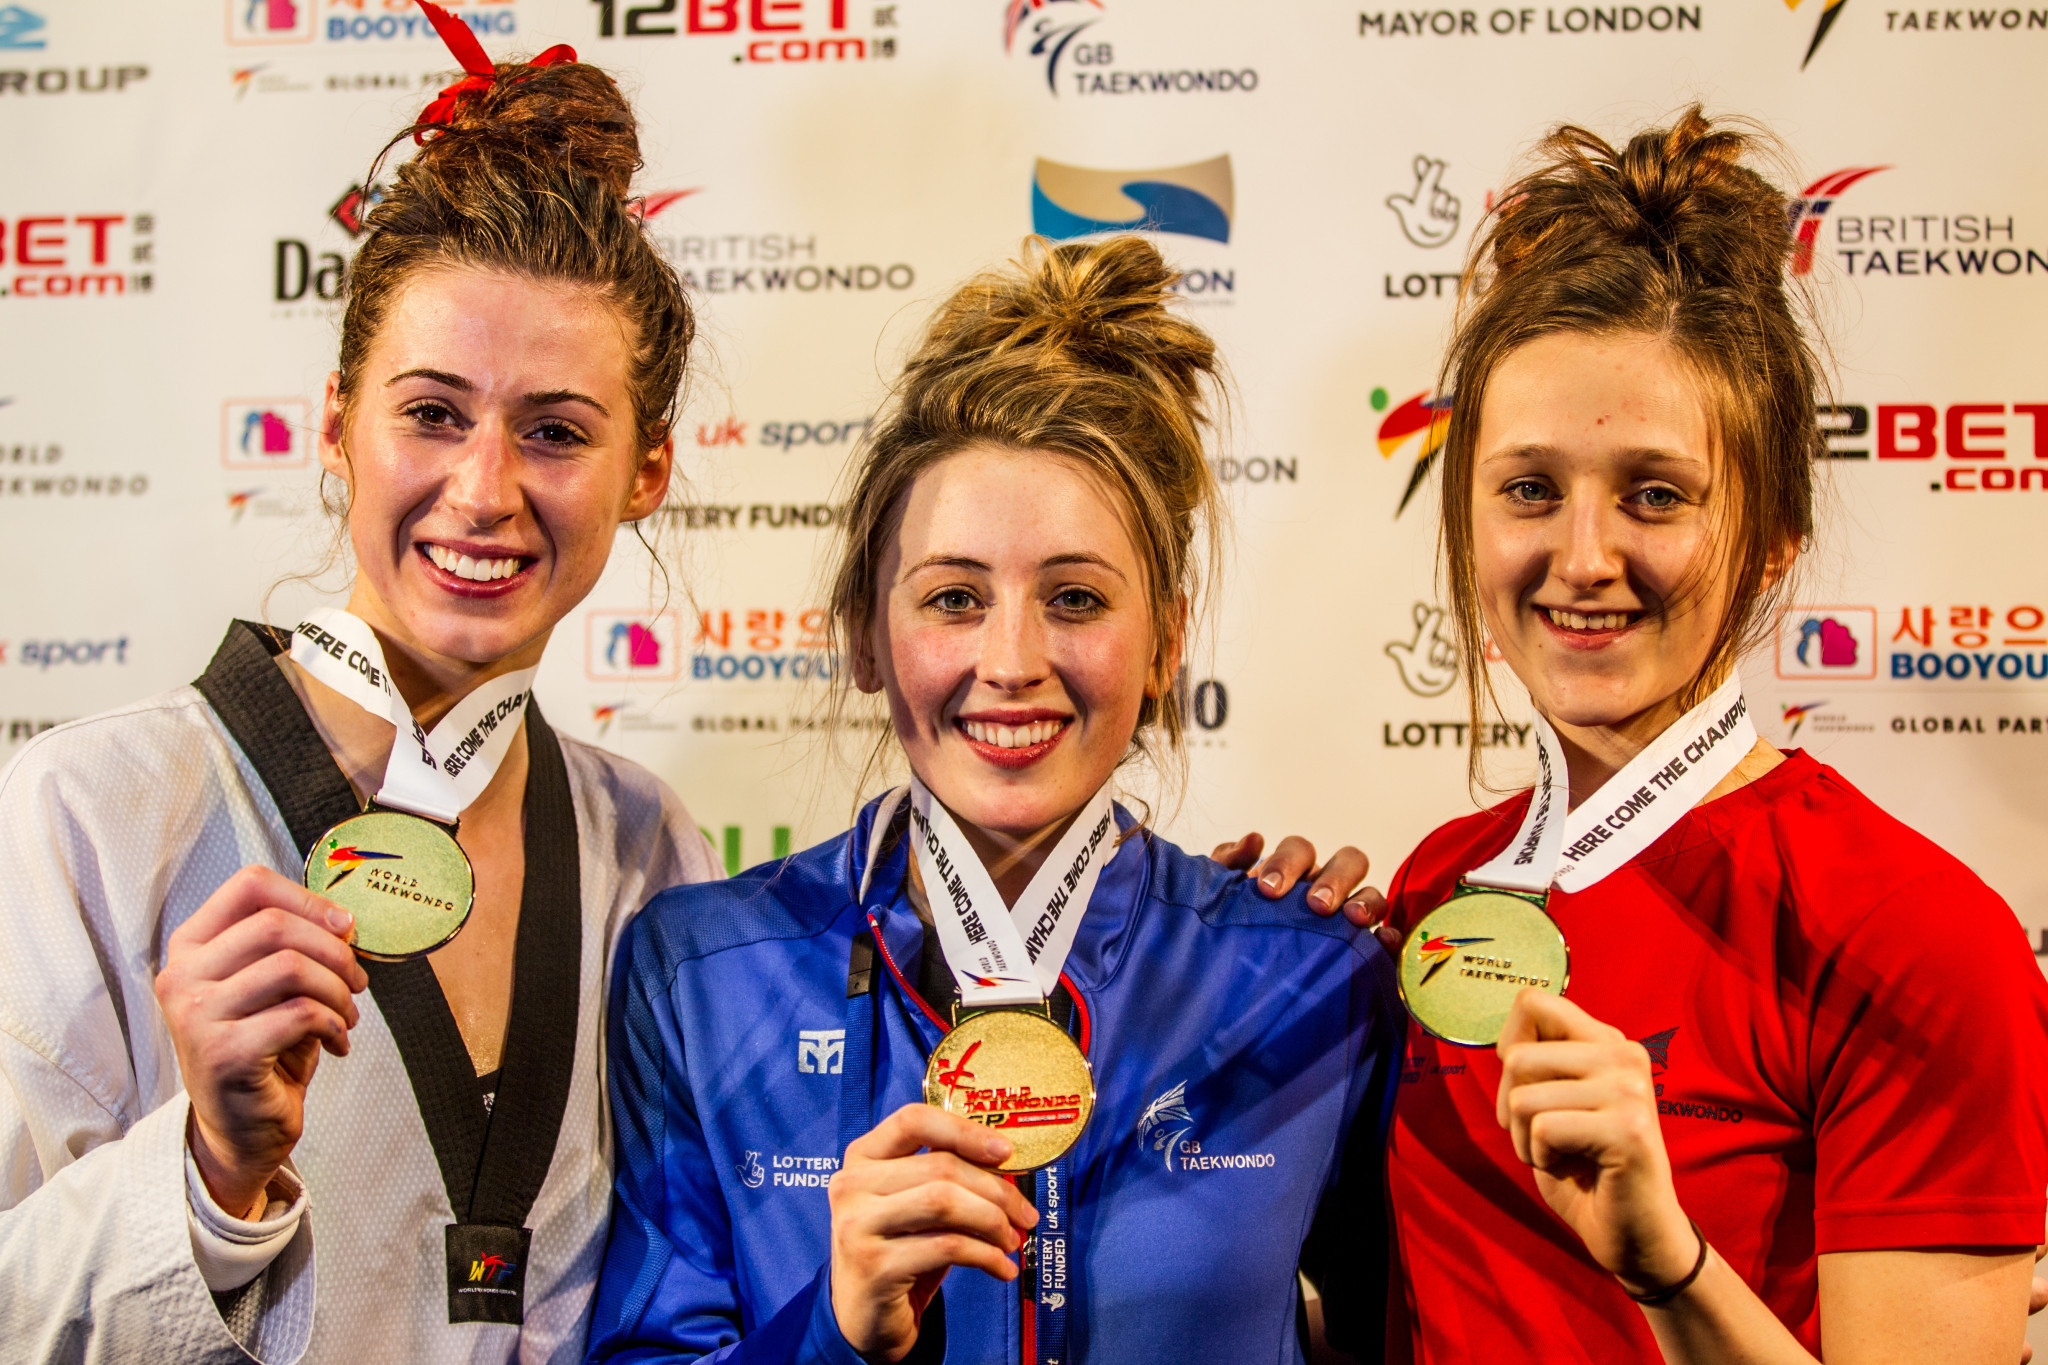 Jones and Walkden take hosts Great Britain's gold medal tally to three at World Taekwondo Grand Prix in London